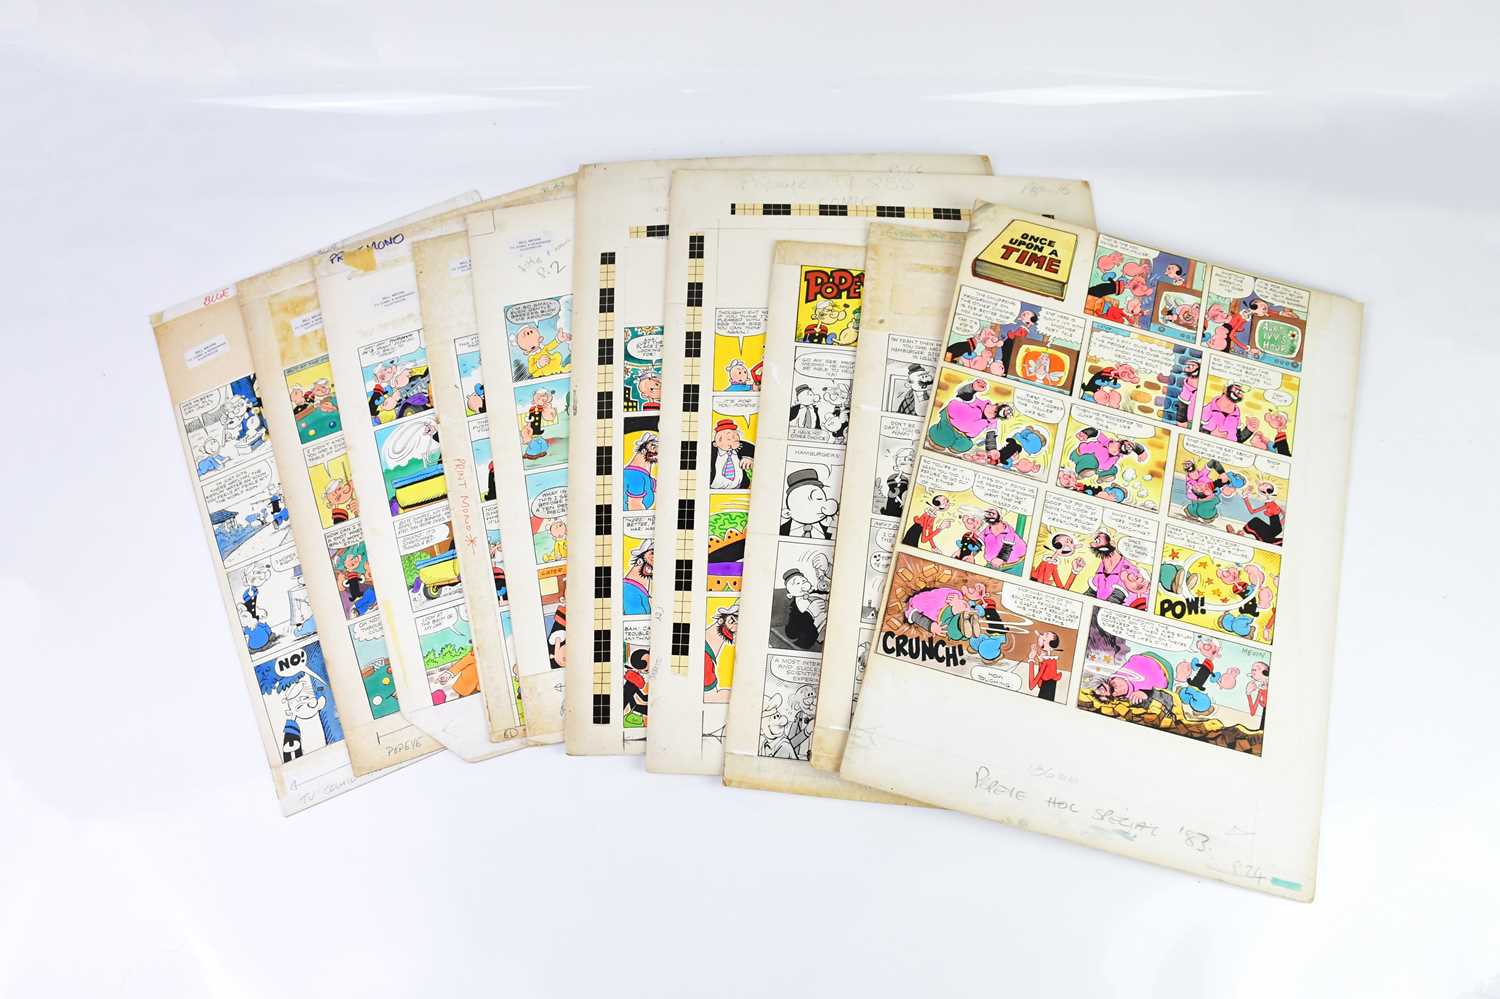 † BILL MEVIN; ten original storyboard cartoons for Popeye, some with annotated detail. Condition